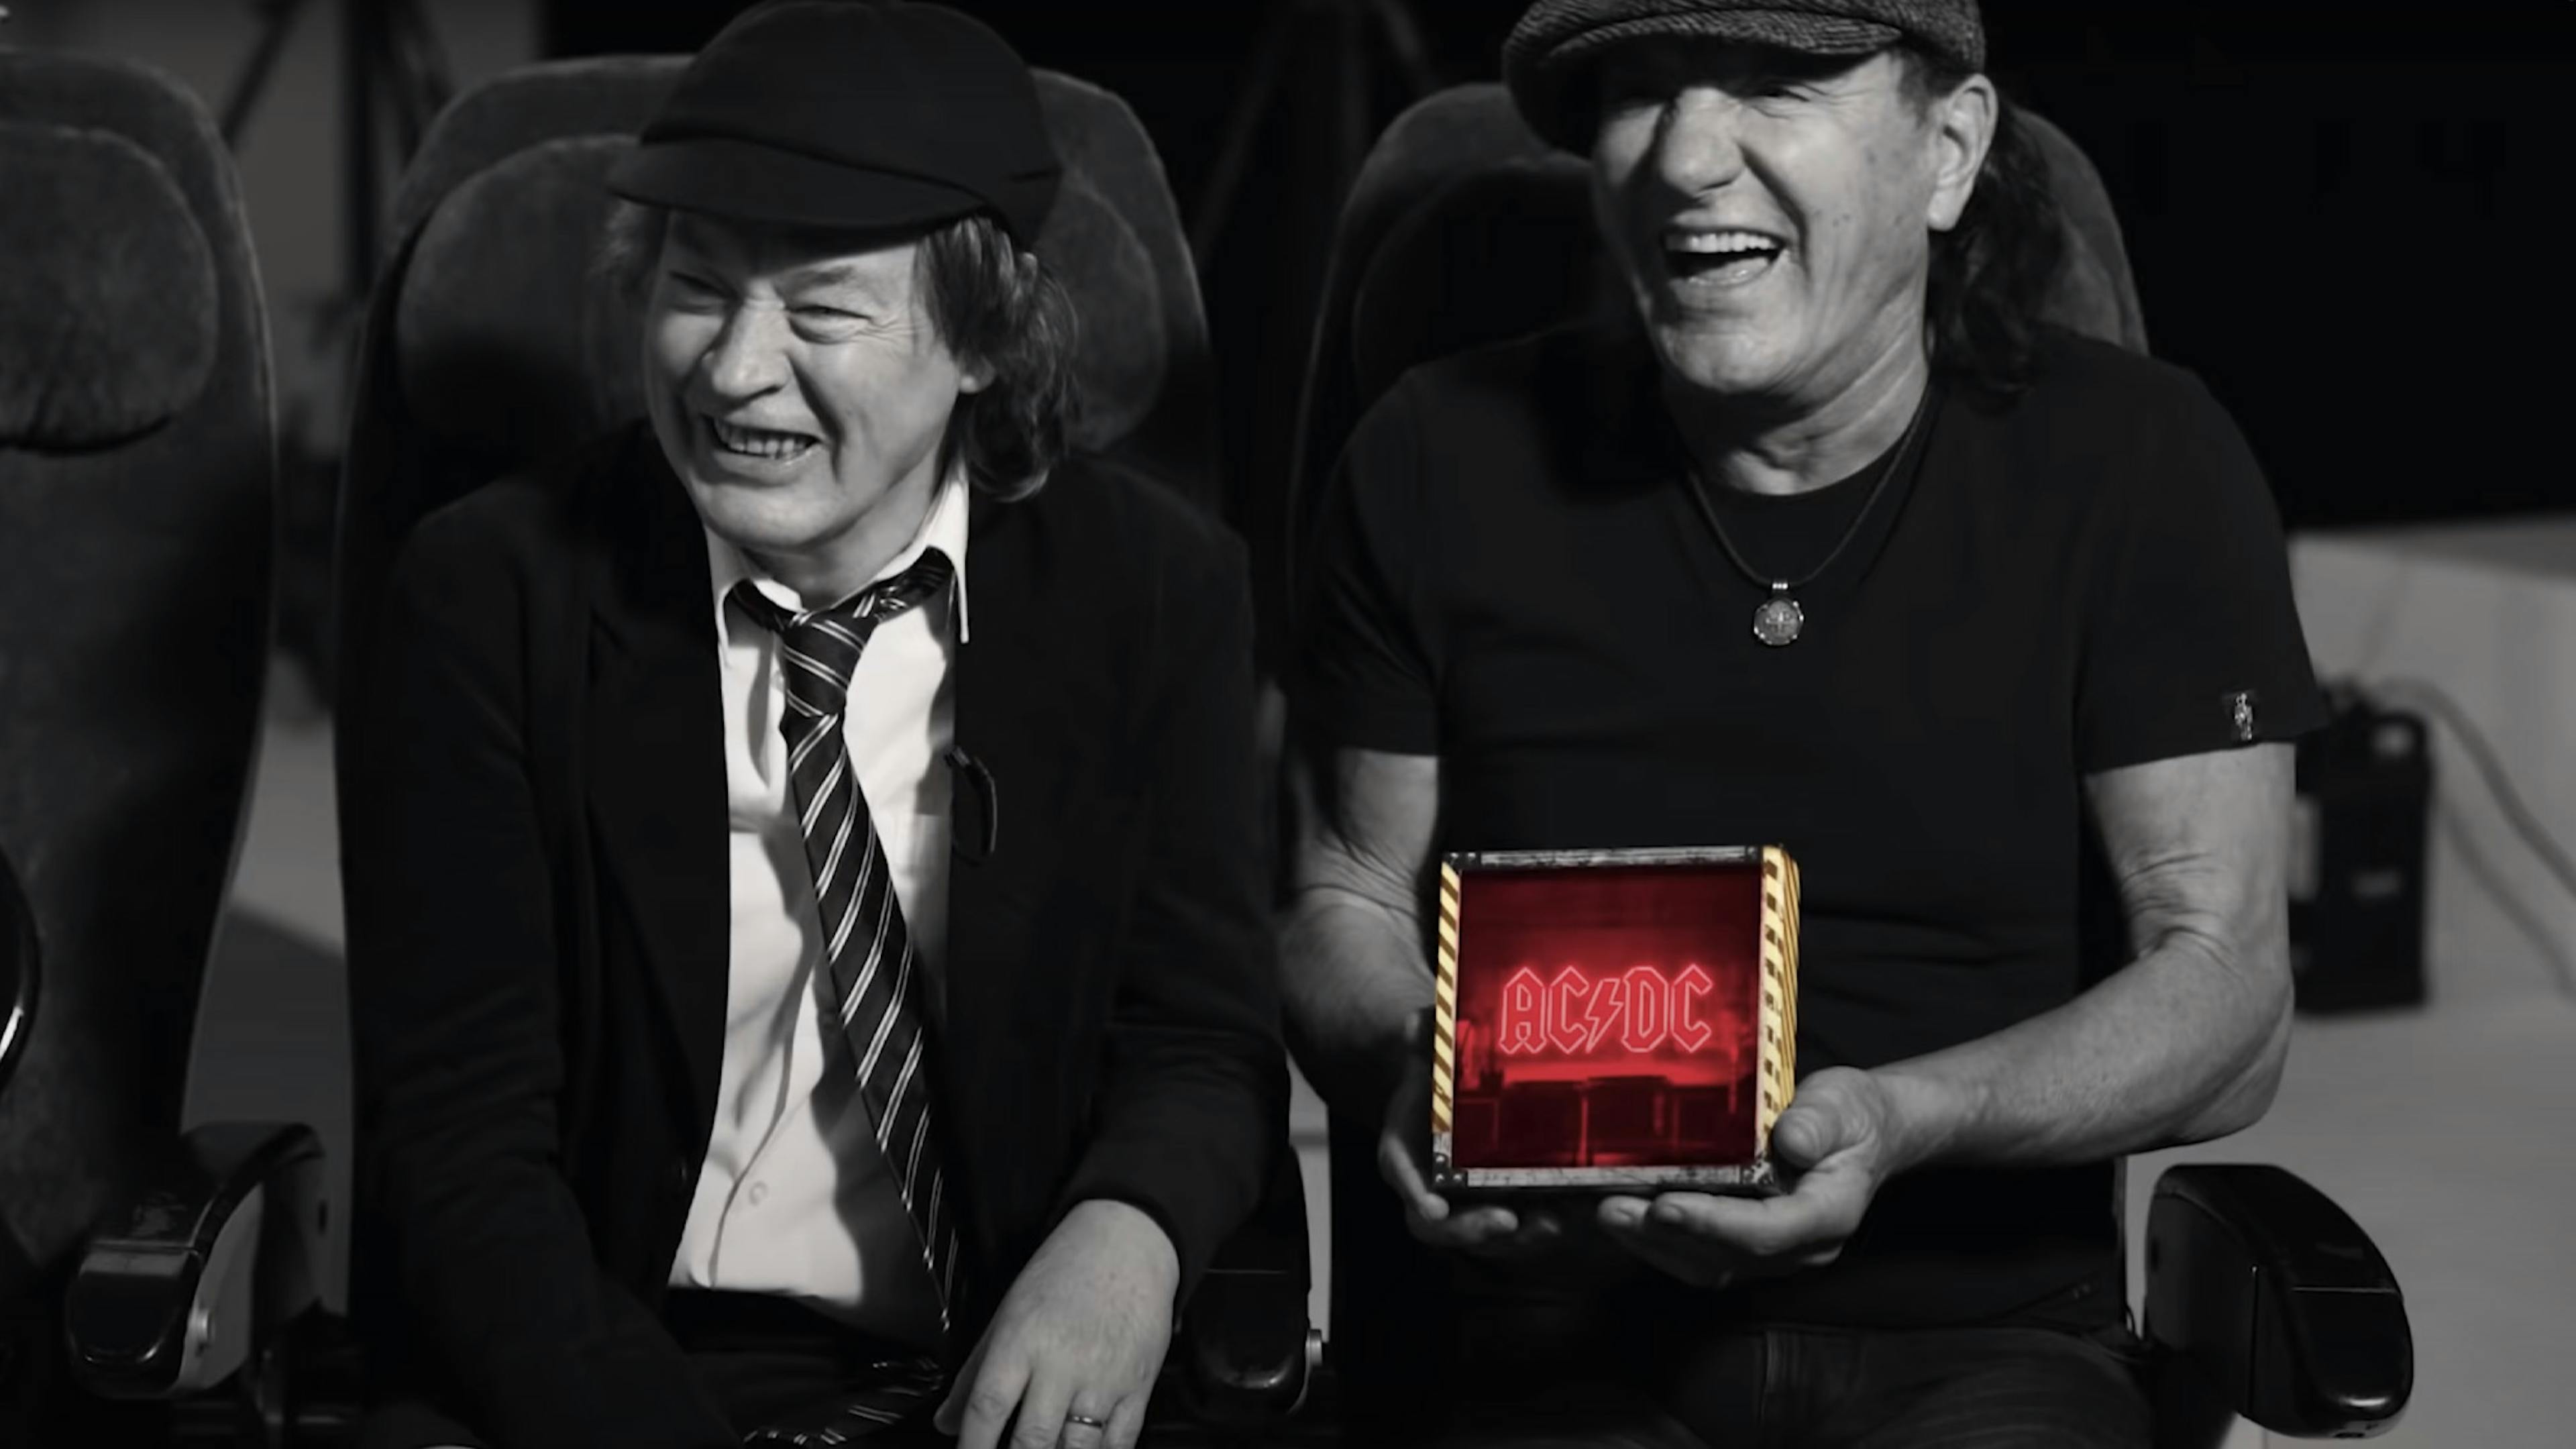 AC/DC: The First Look At The Deluxe Lightbox Edition Of POWER UP